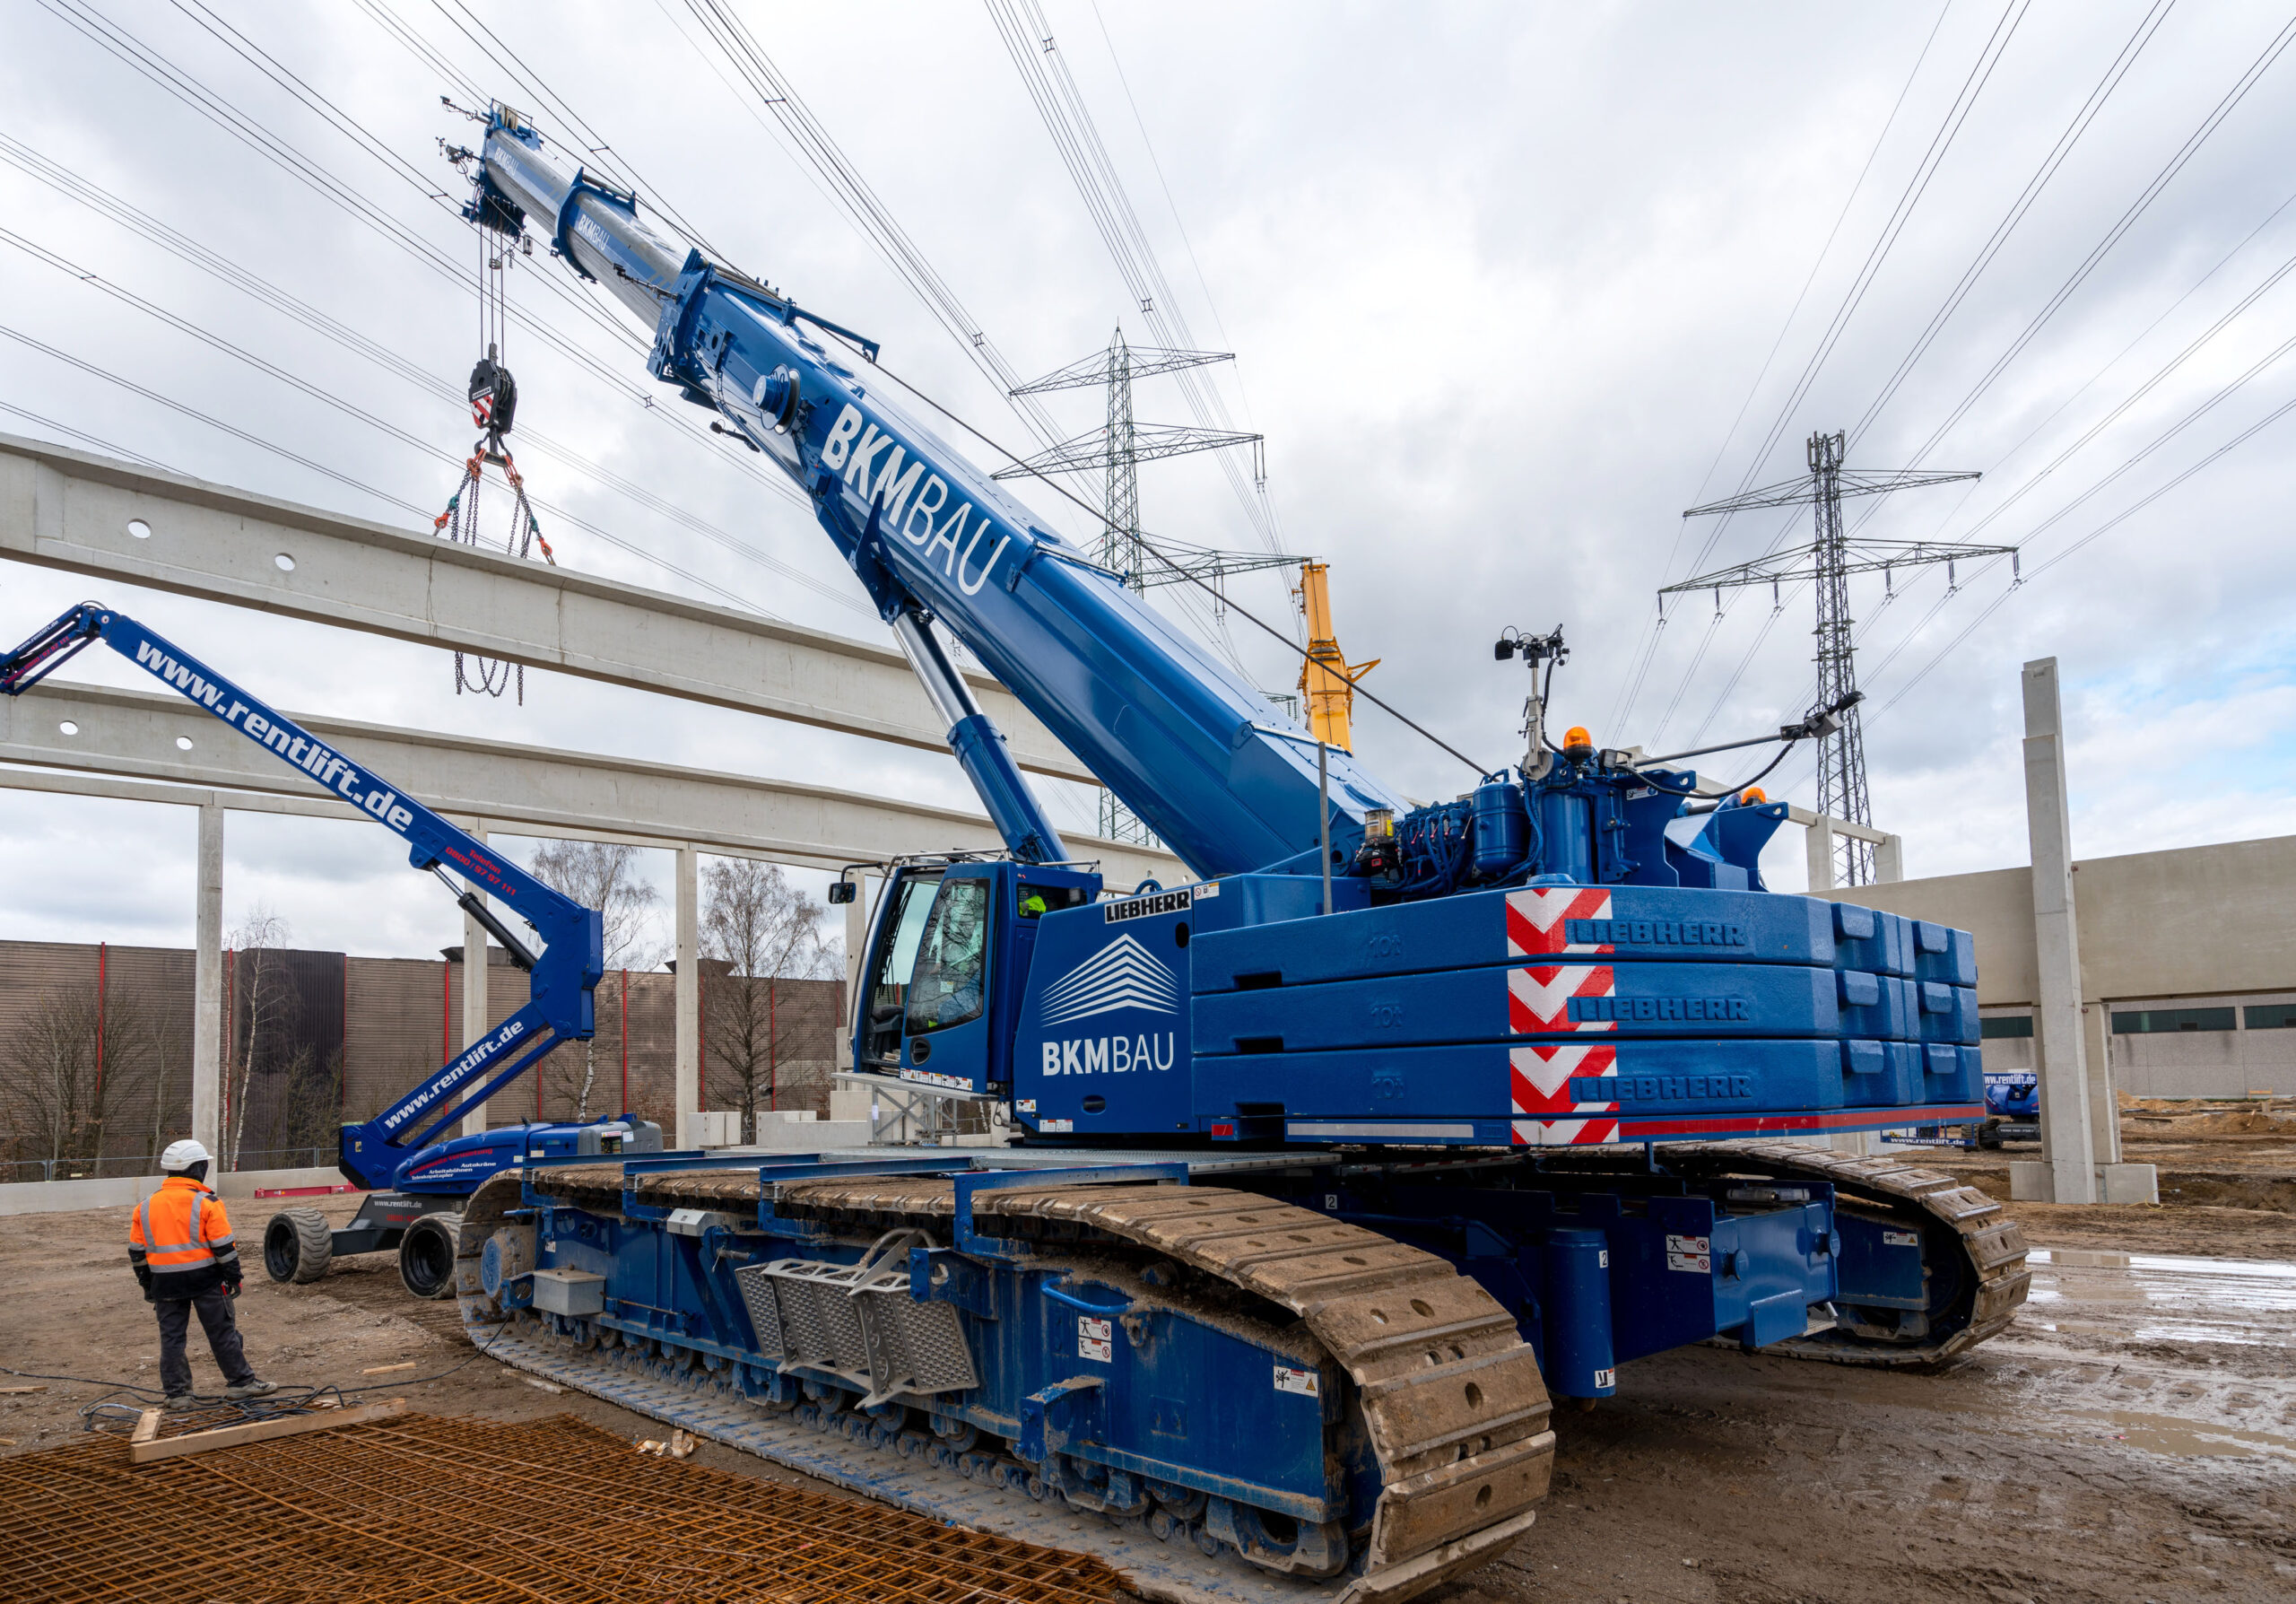 The mightiest beast: the Liebherr LTR 1220 offers the highest performance in the telescopic crawler crane segment worldwide.